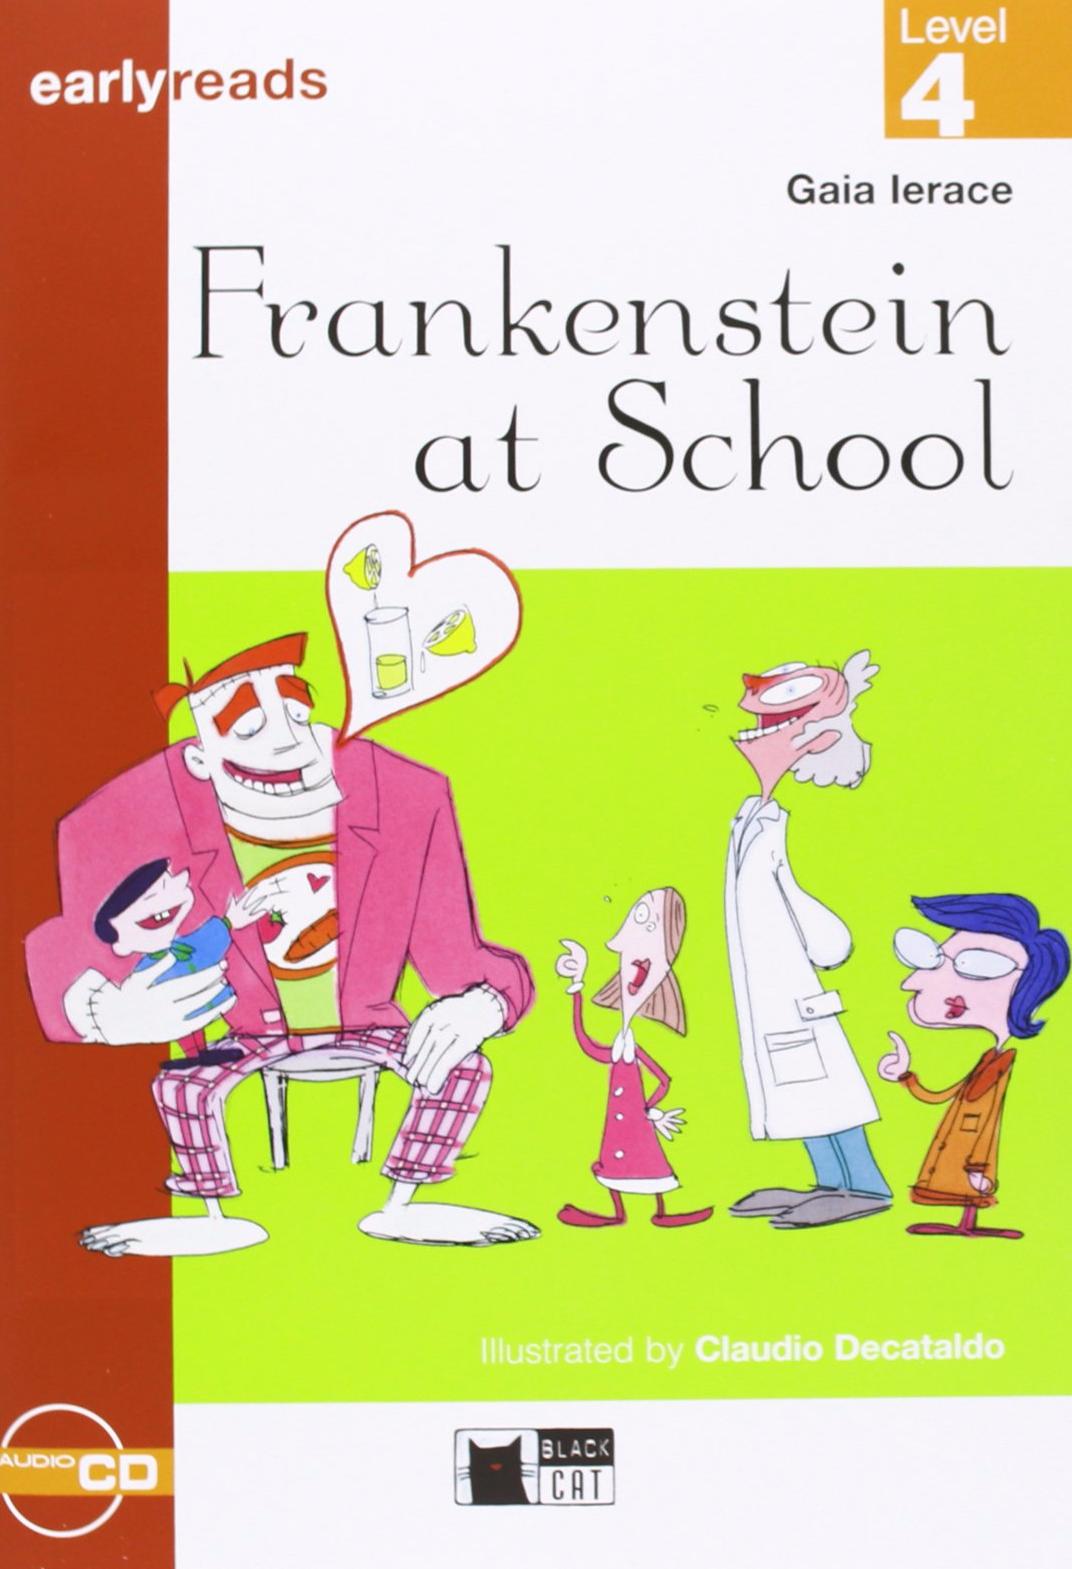 FRANKENSTEIN AT SCHOOL (EARLYREADS LEVEL 4)  Book with AudioCD